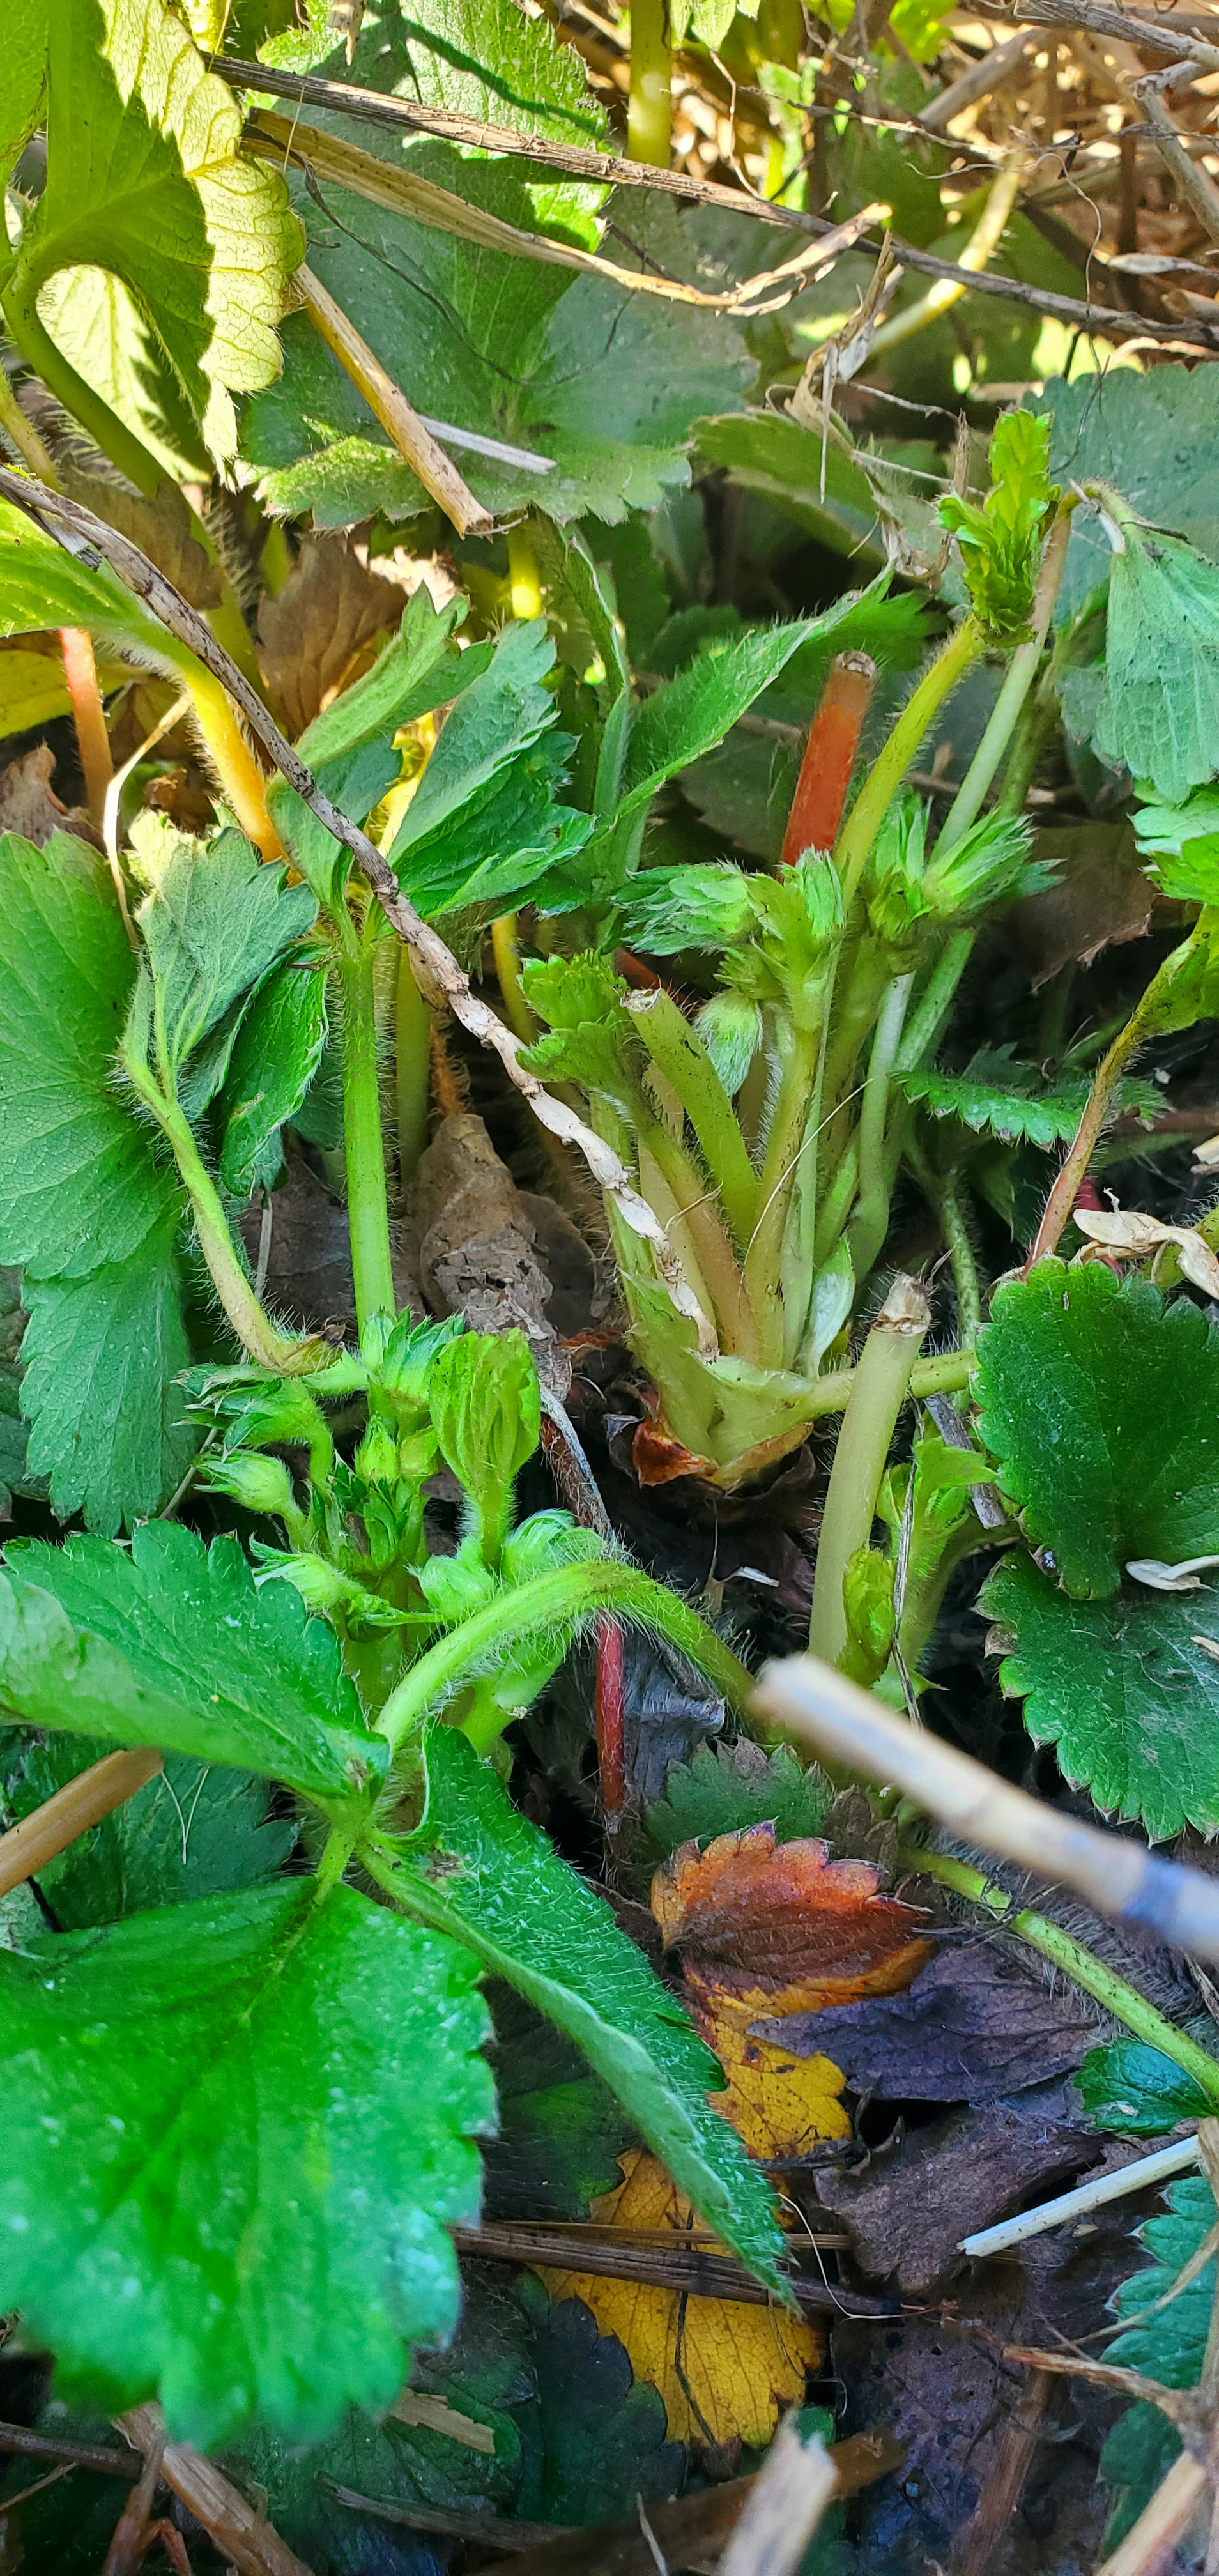 Strawberries in tight bud stage.